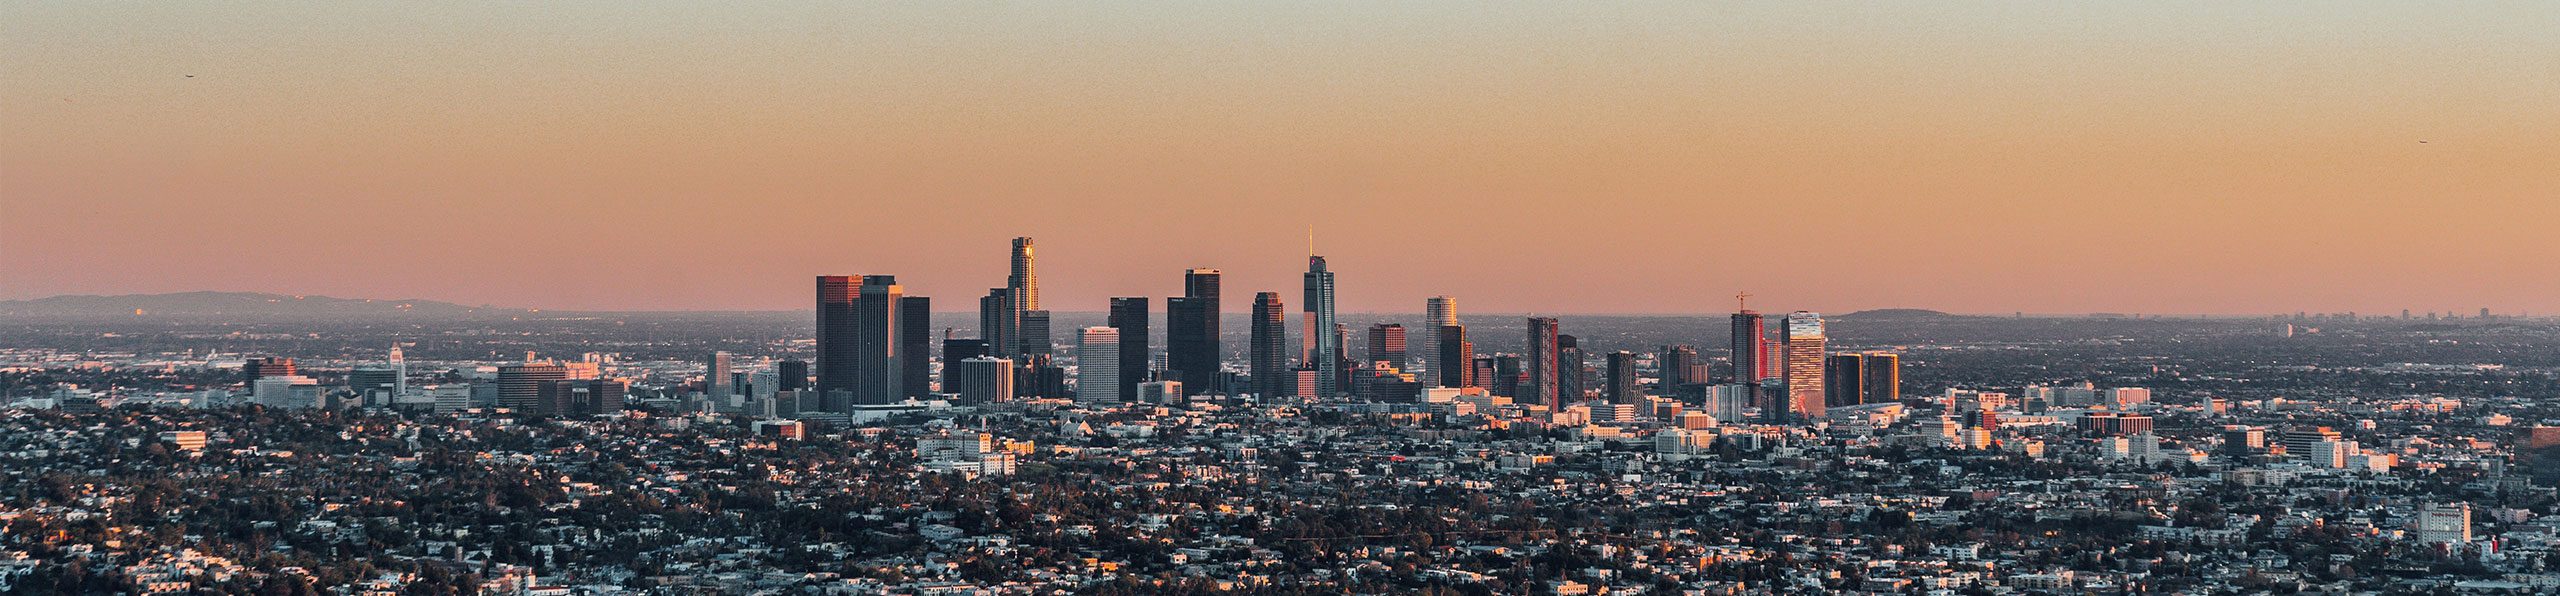 view of downtown los angeles by sunset